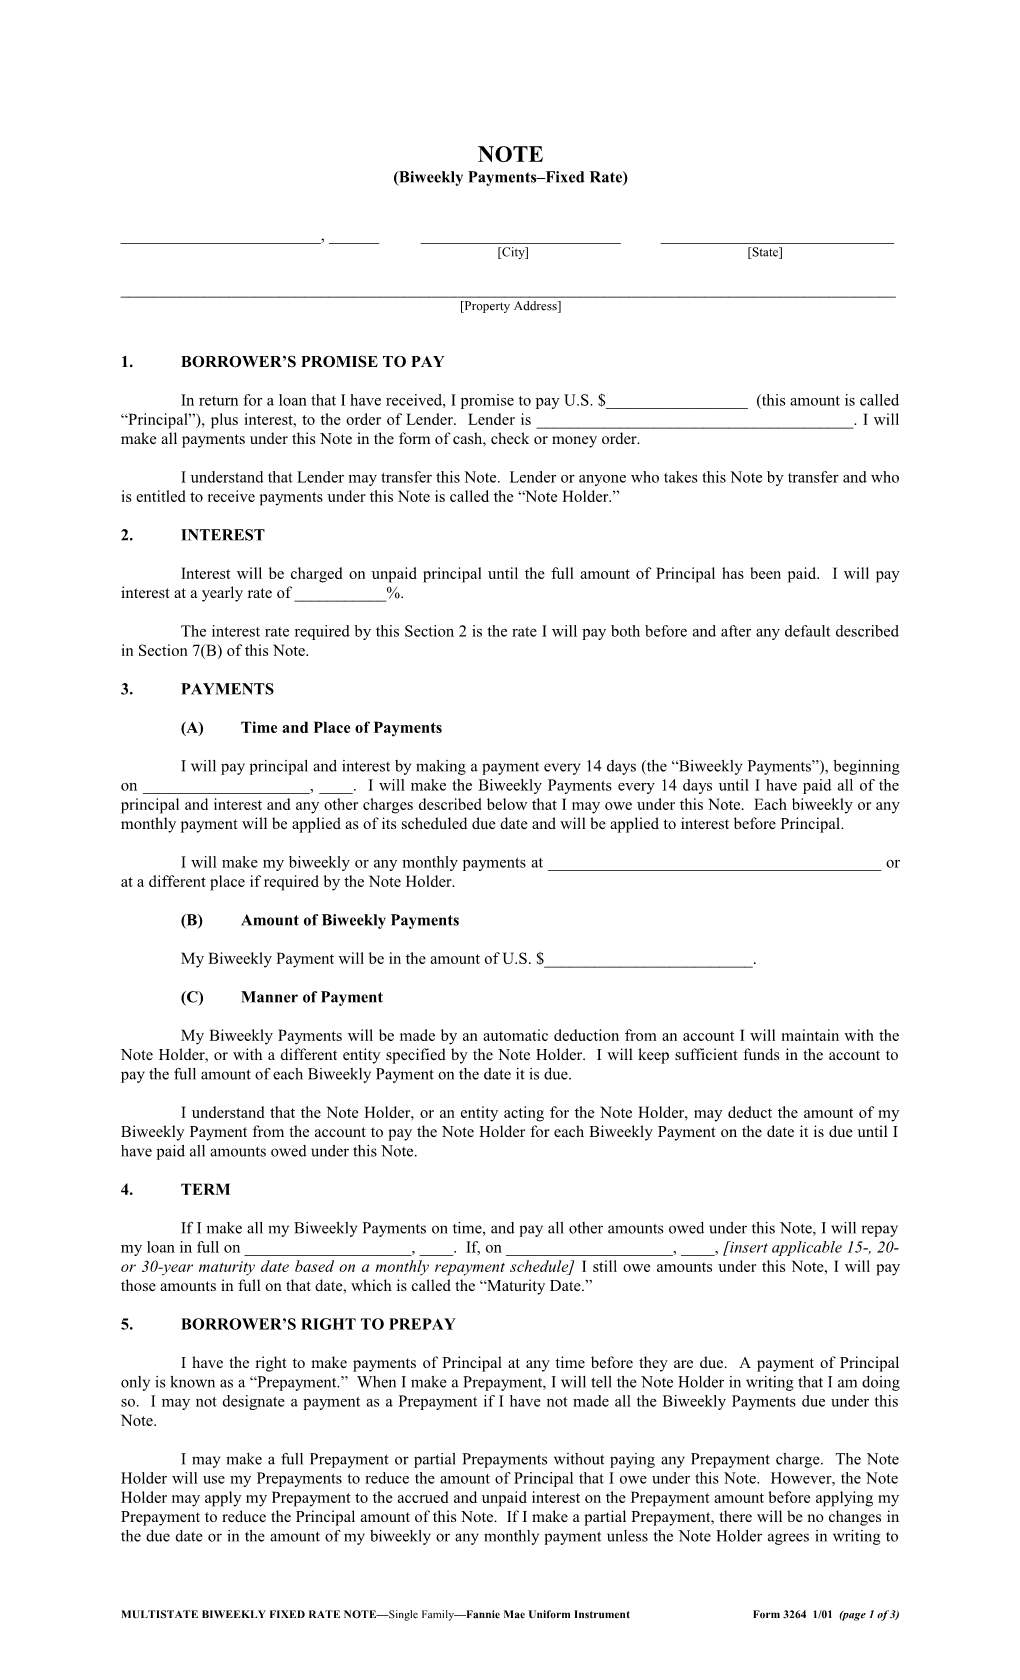 Multistate Biweekly Fixed Rate Note (Form 3264): Word